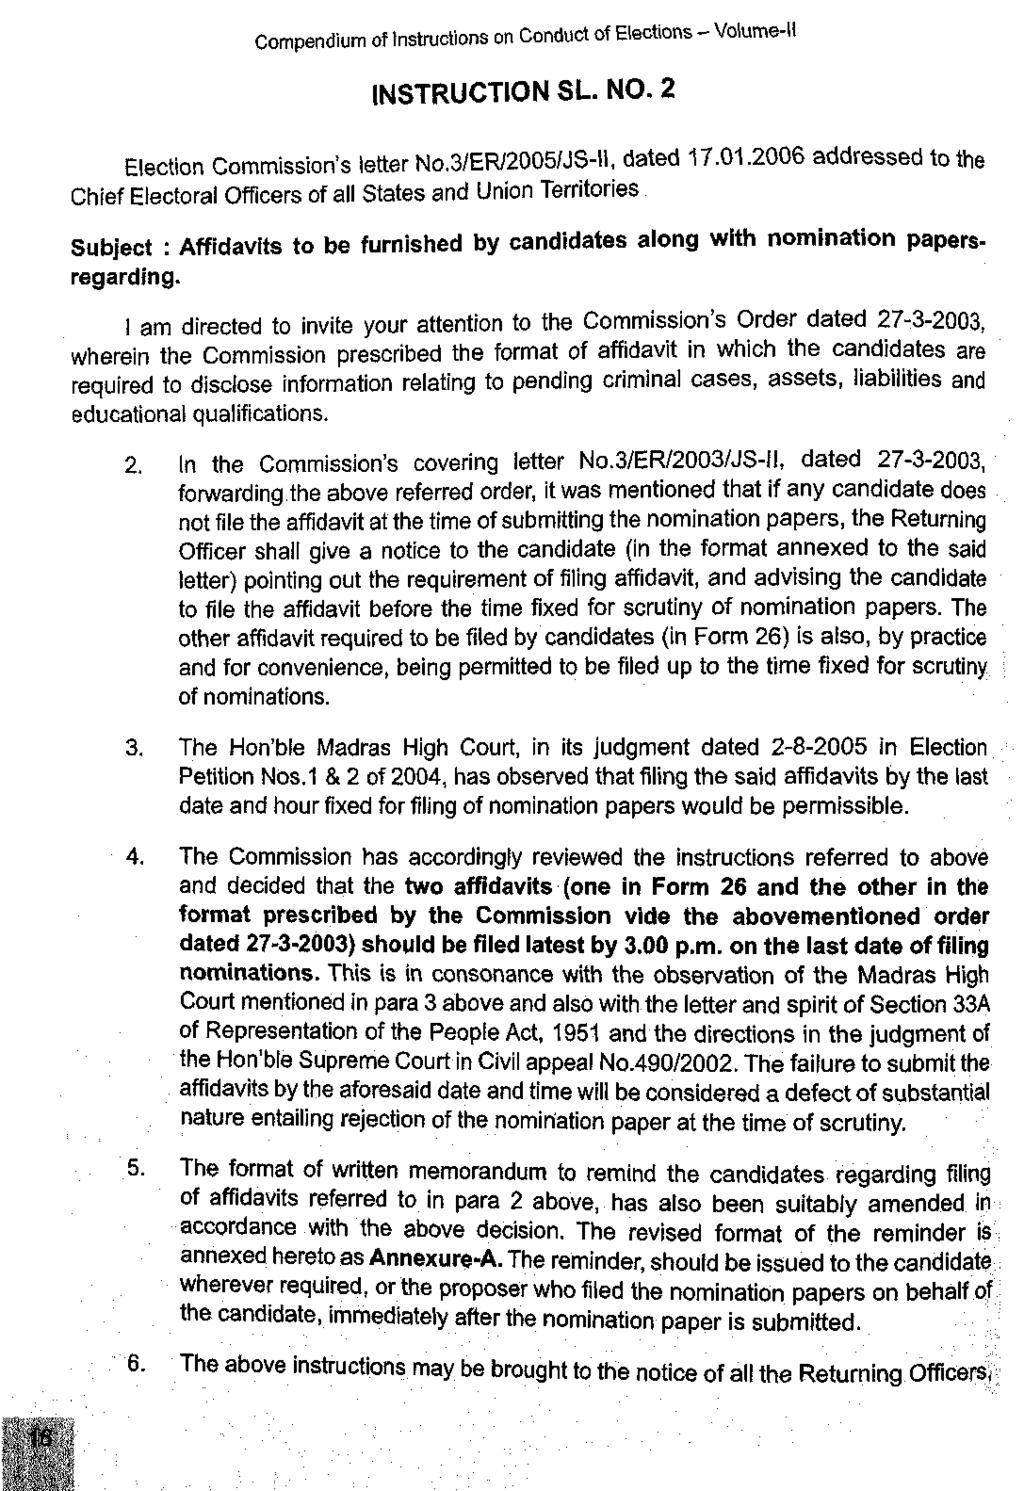 Compendium of Instructions on Conduct of Elections - Volume-ll INSTRUCTION SL. NO. 2 Election Commission's letter No.3/ER/2005/JS-ll, dated 17.01.